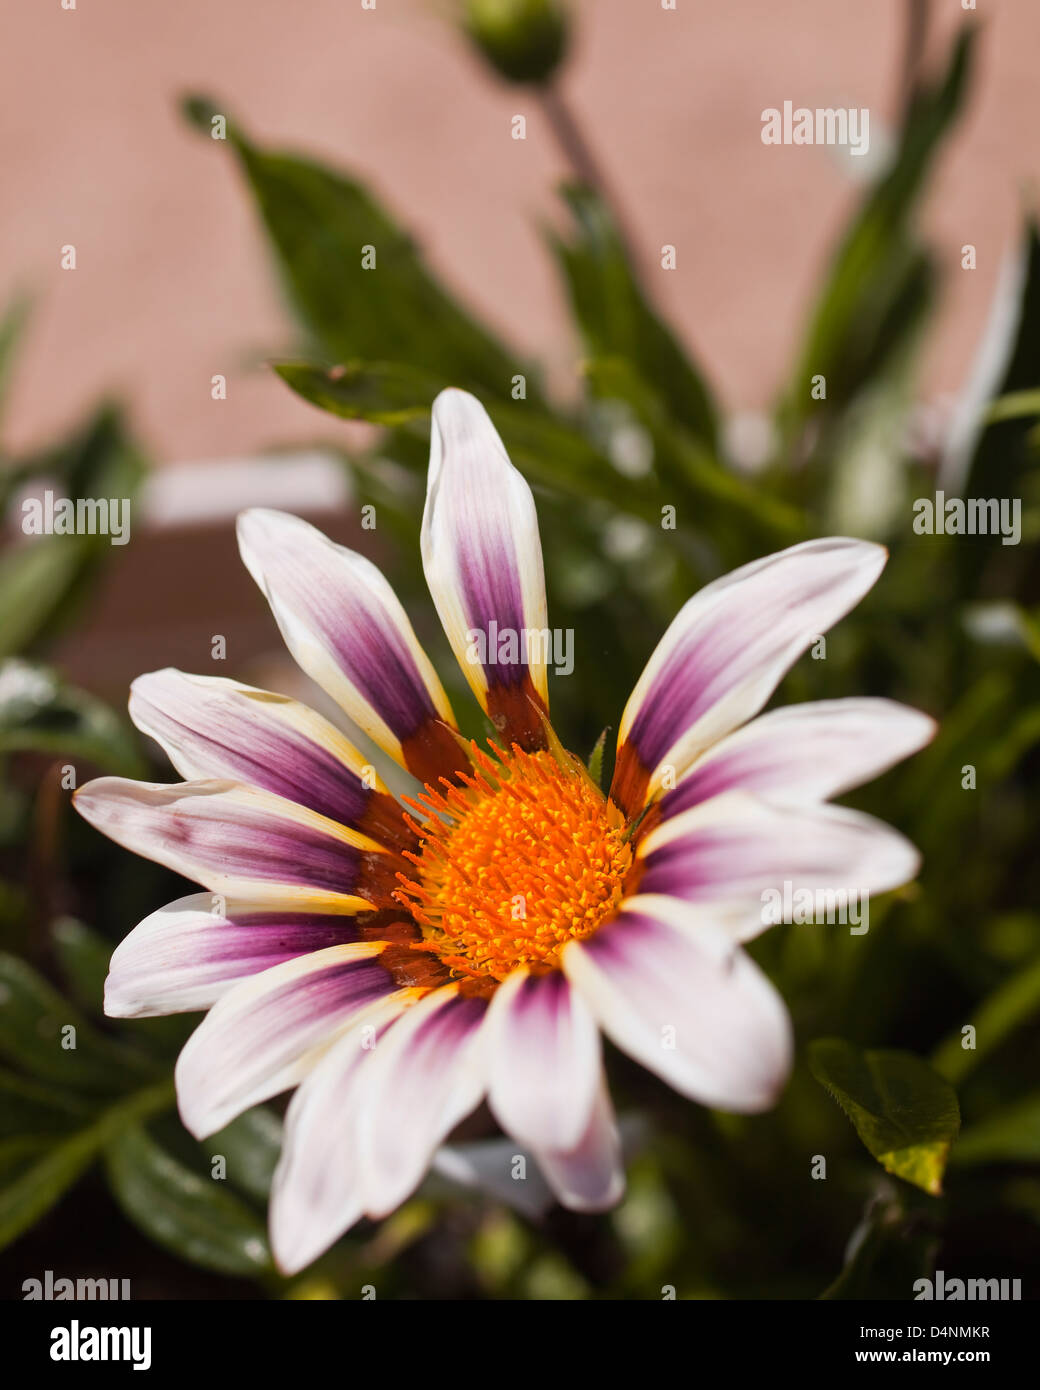 A gazania plant from the family Asteraceae, native to Southern Africa. Stock Photo